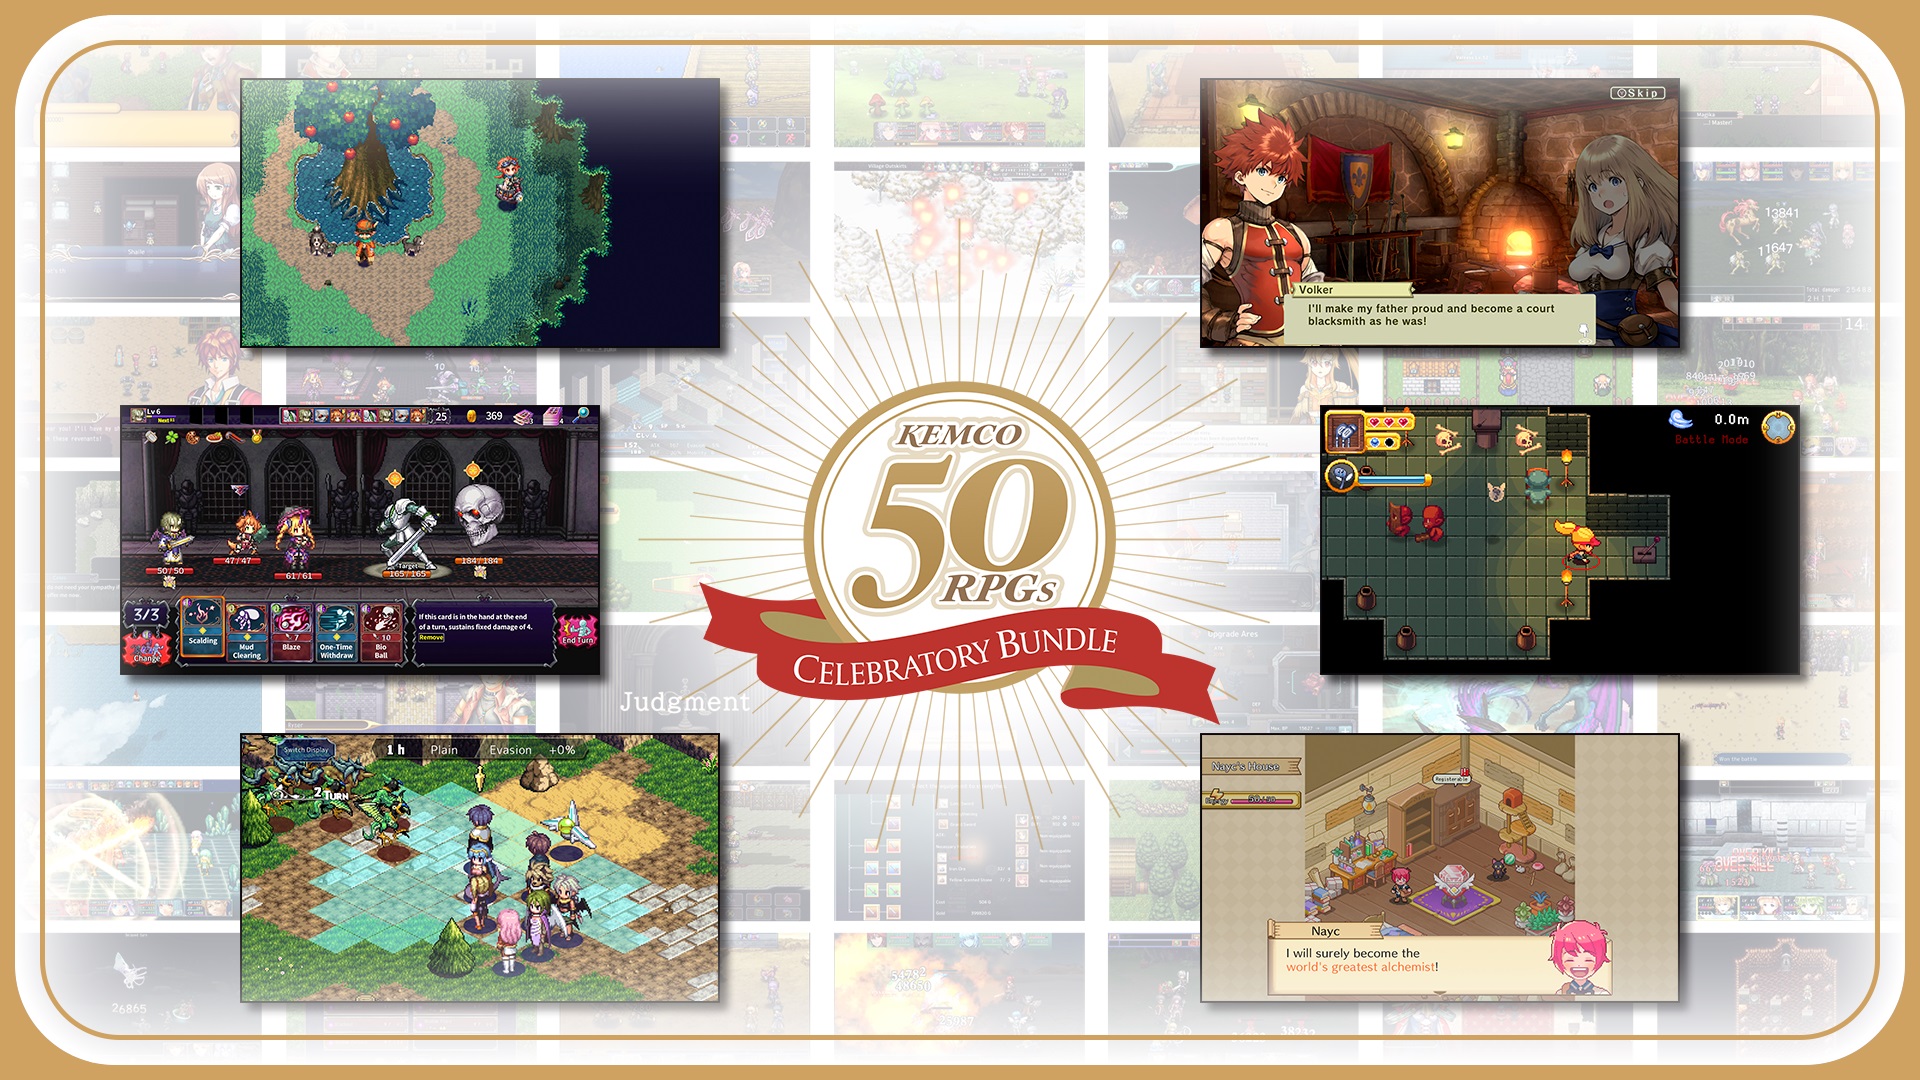 Play By the Historical past of Kemco Video games with the Kemco: 50 RPGs Celebratory Bundle